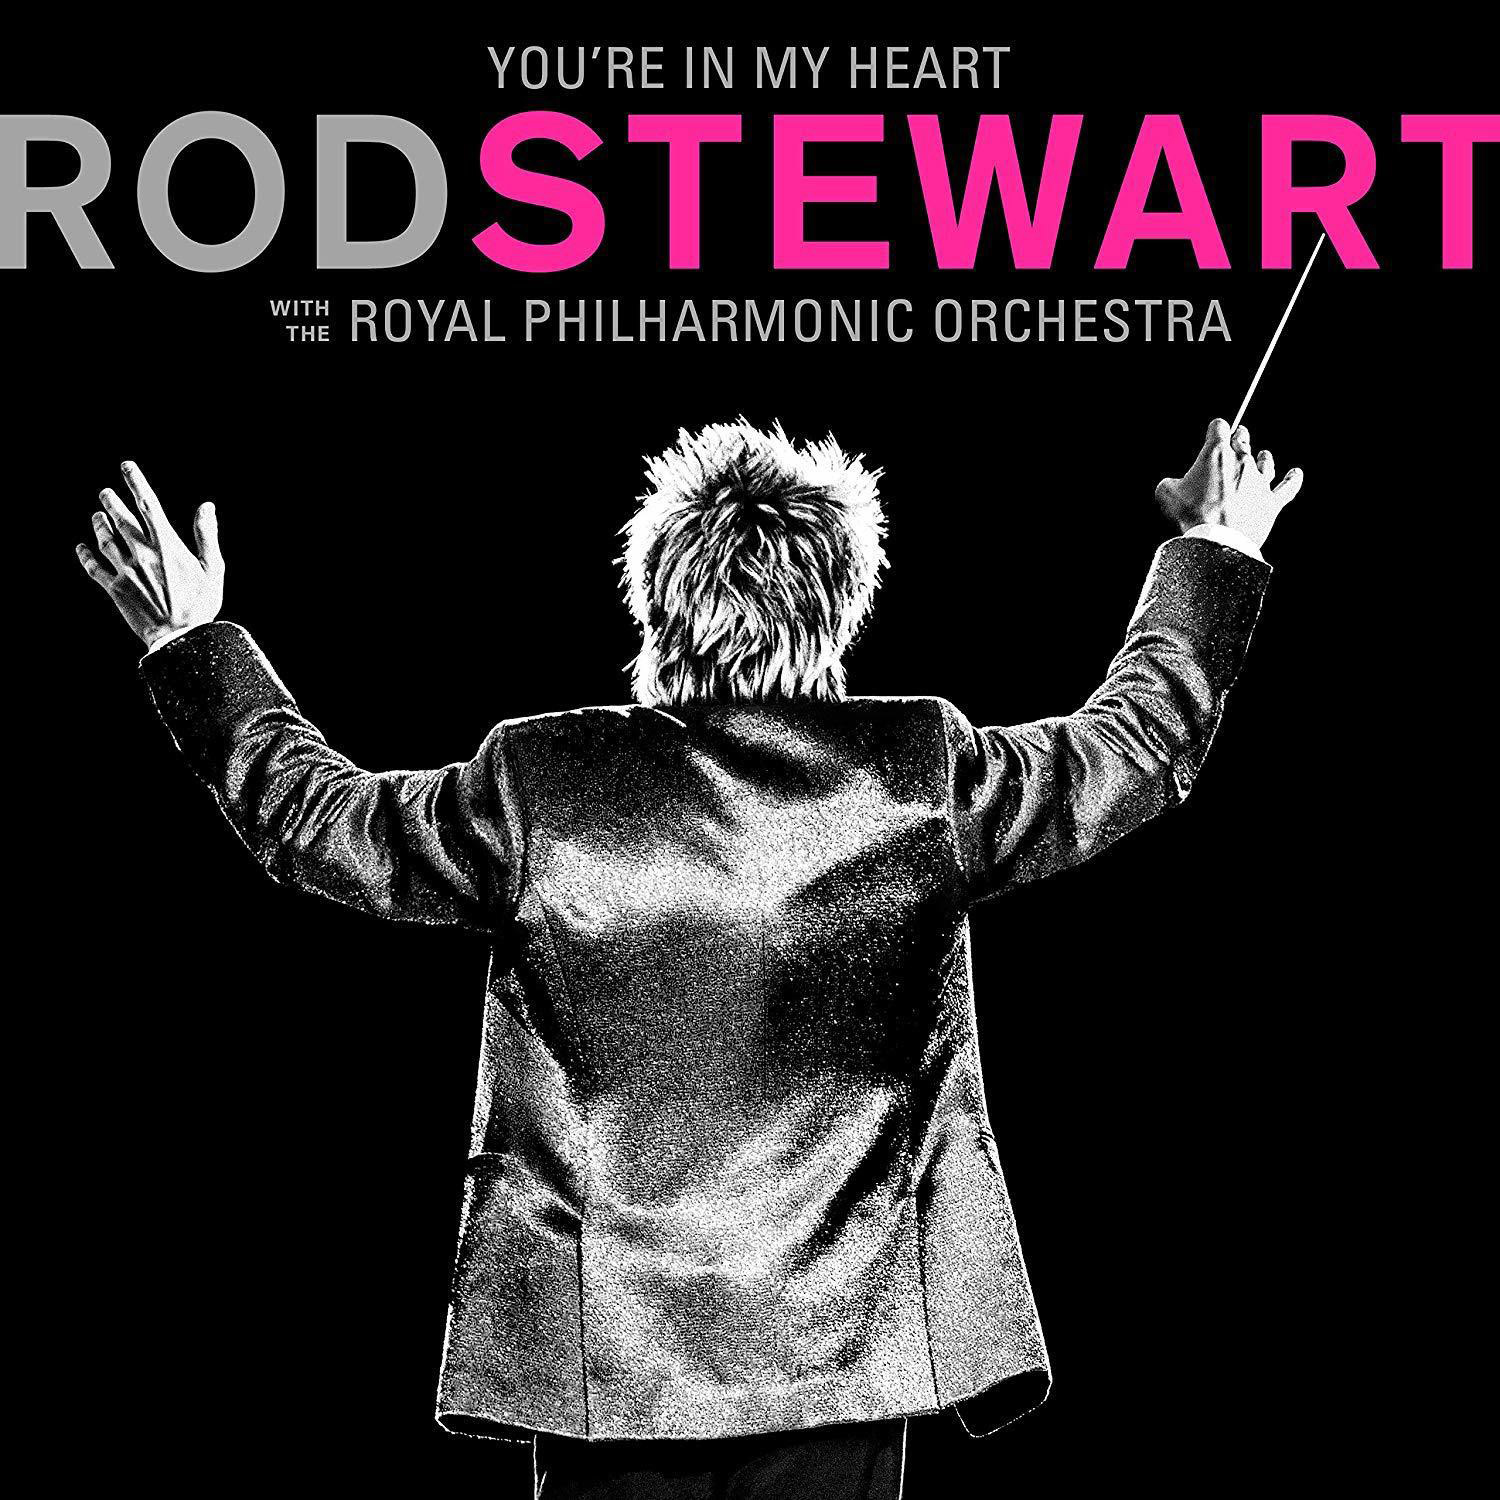 THE (CD) (WITH HEART Stewart - IN Rod YOU\'RE MY -